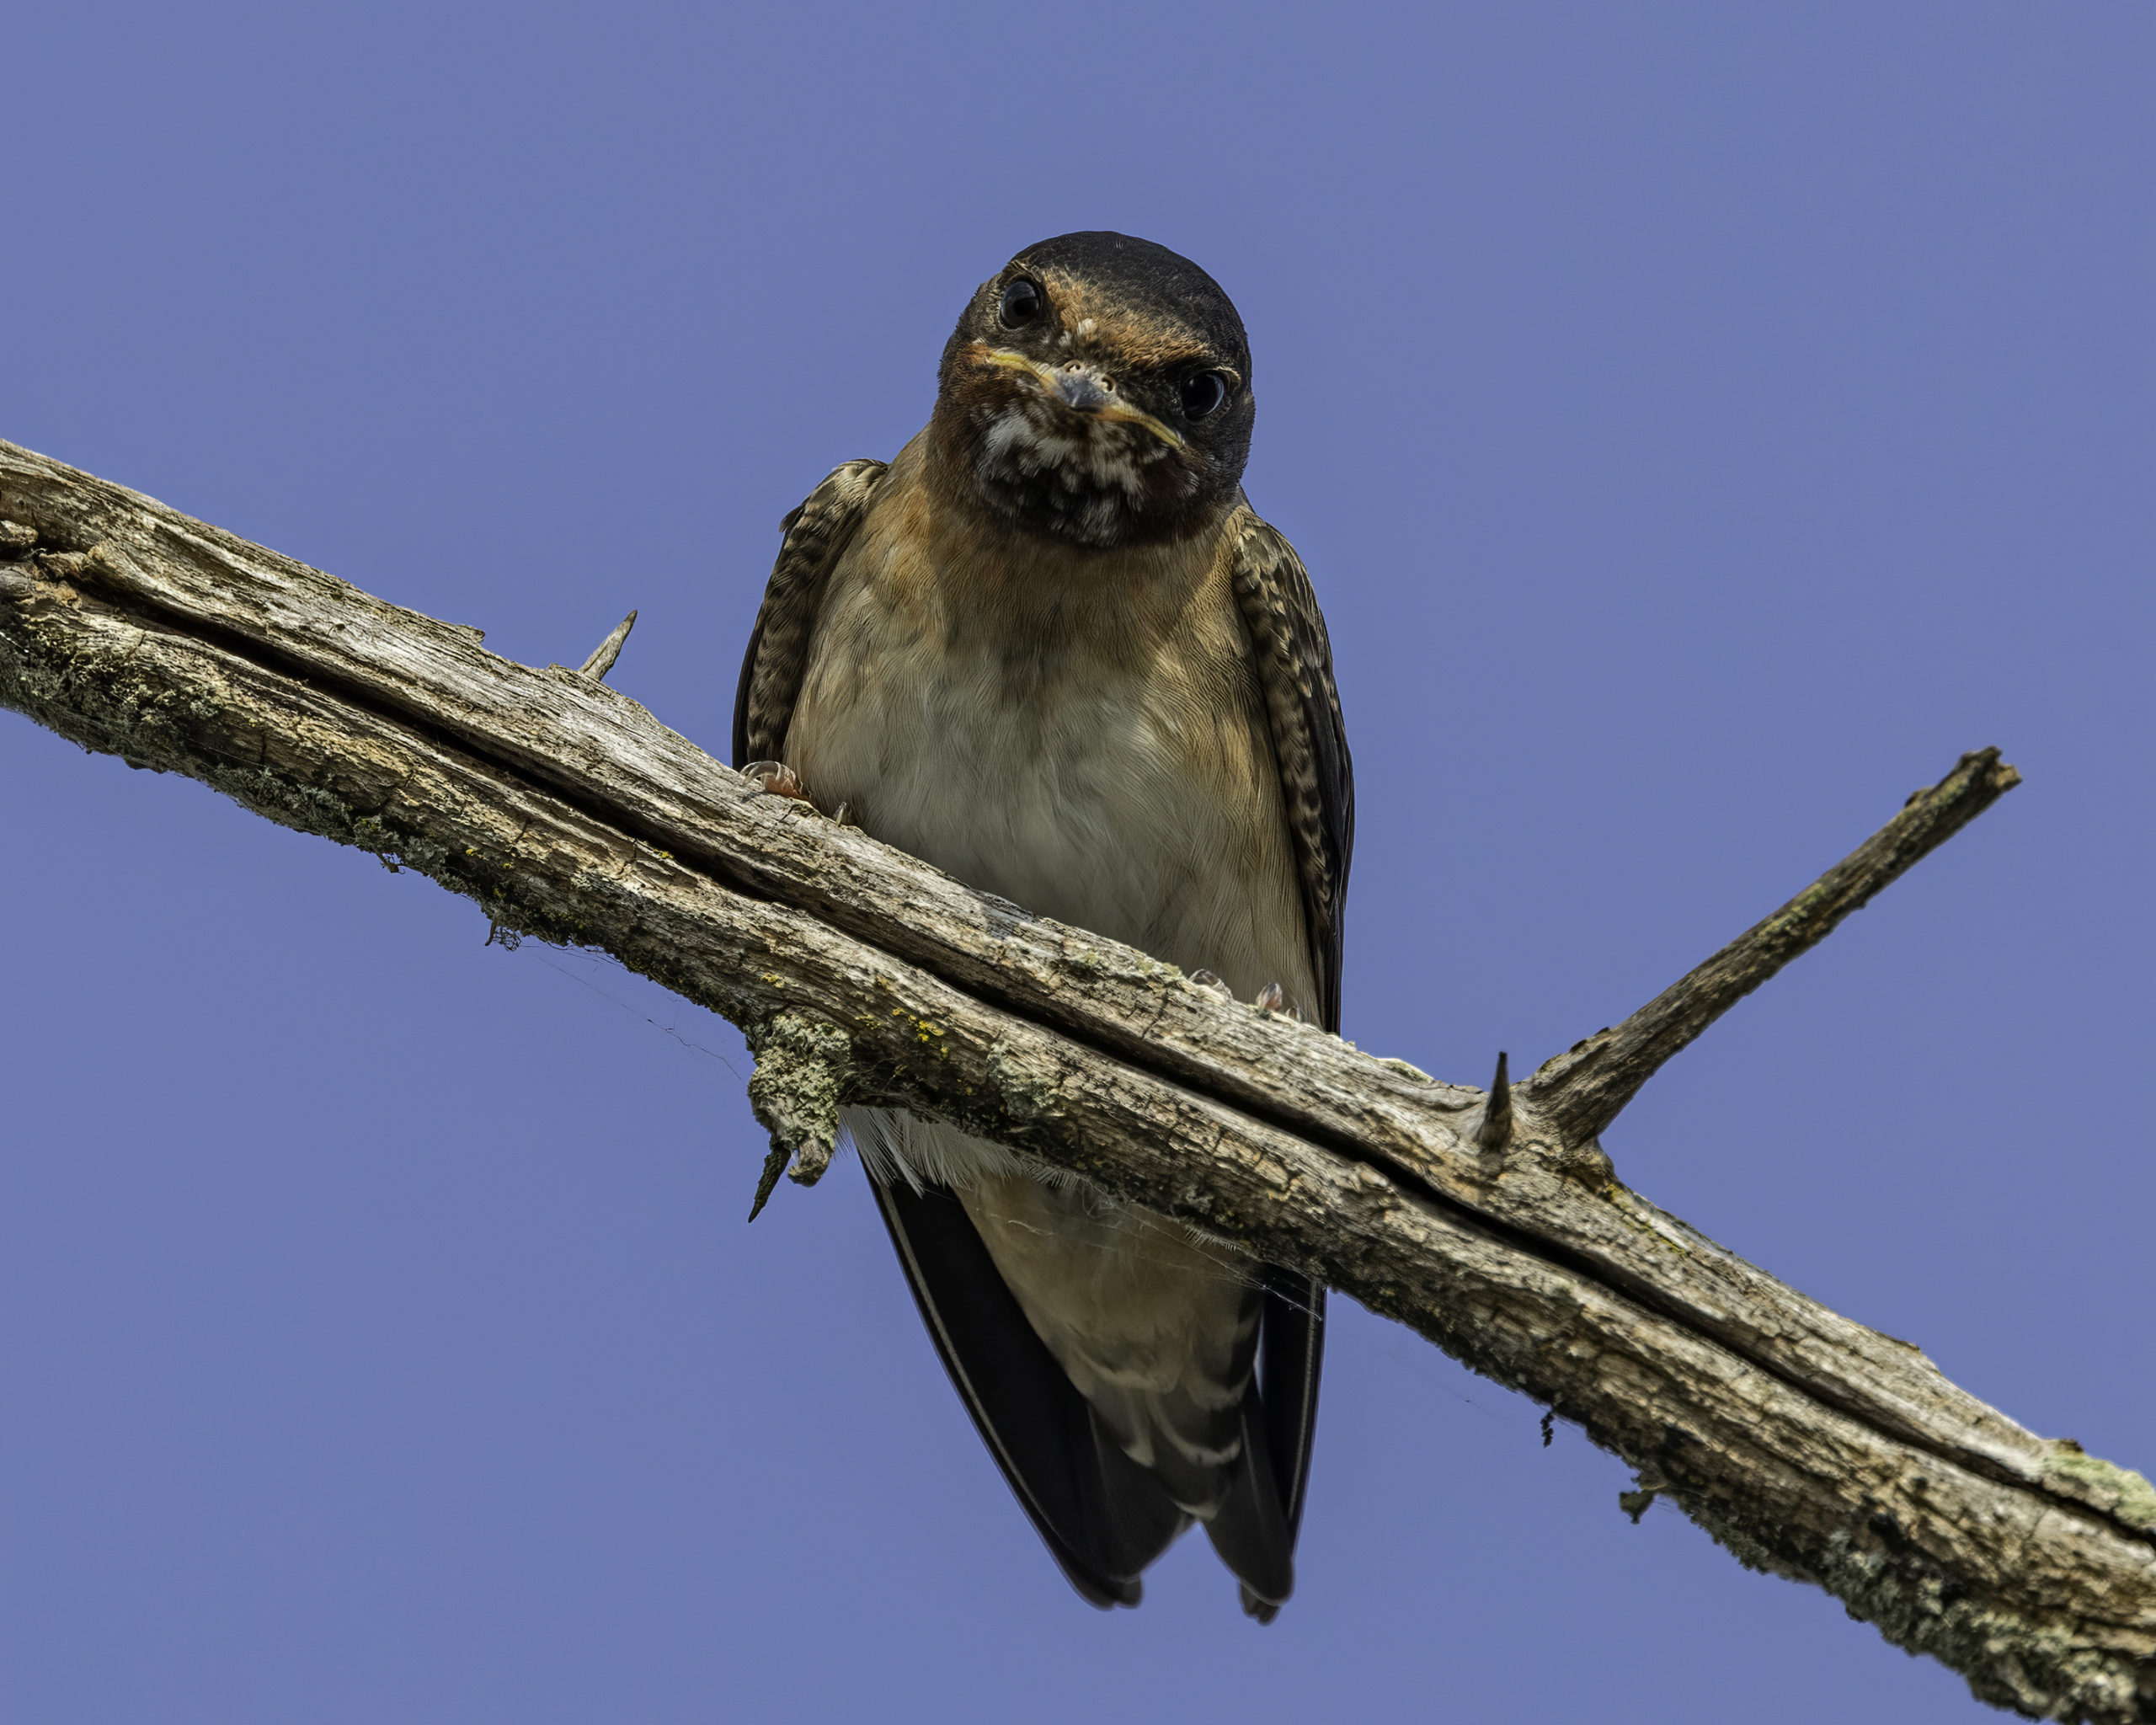 A cliff swallow perched on a branch